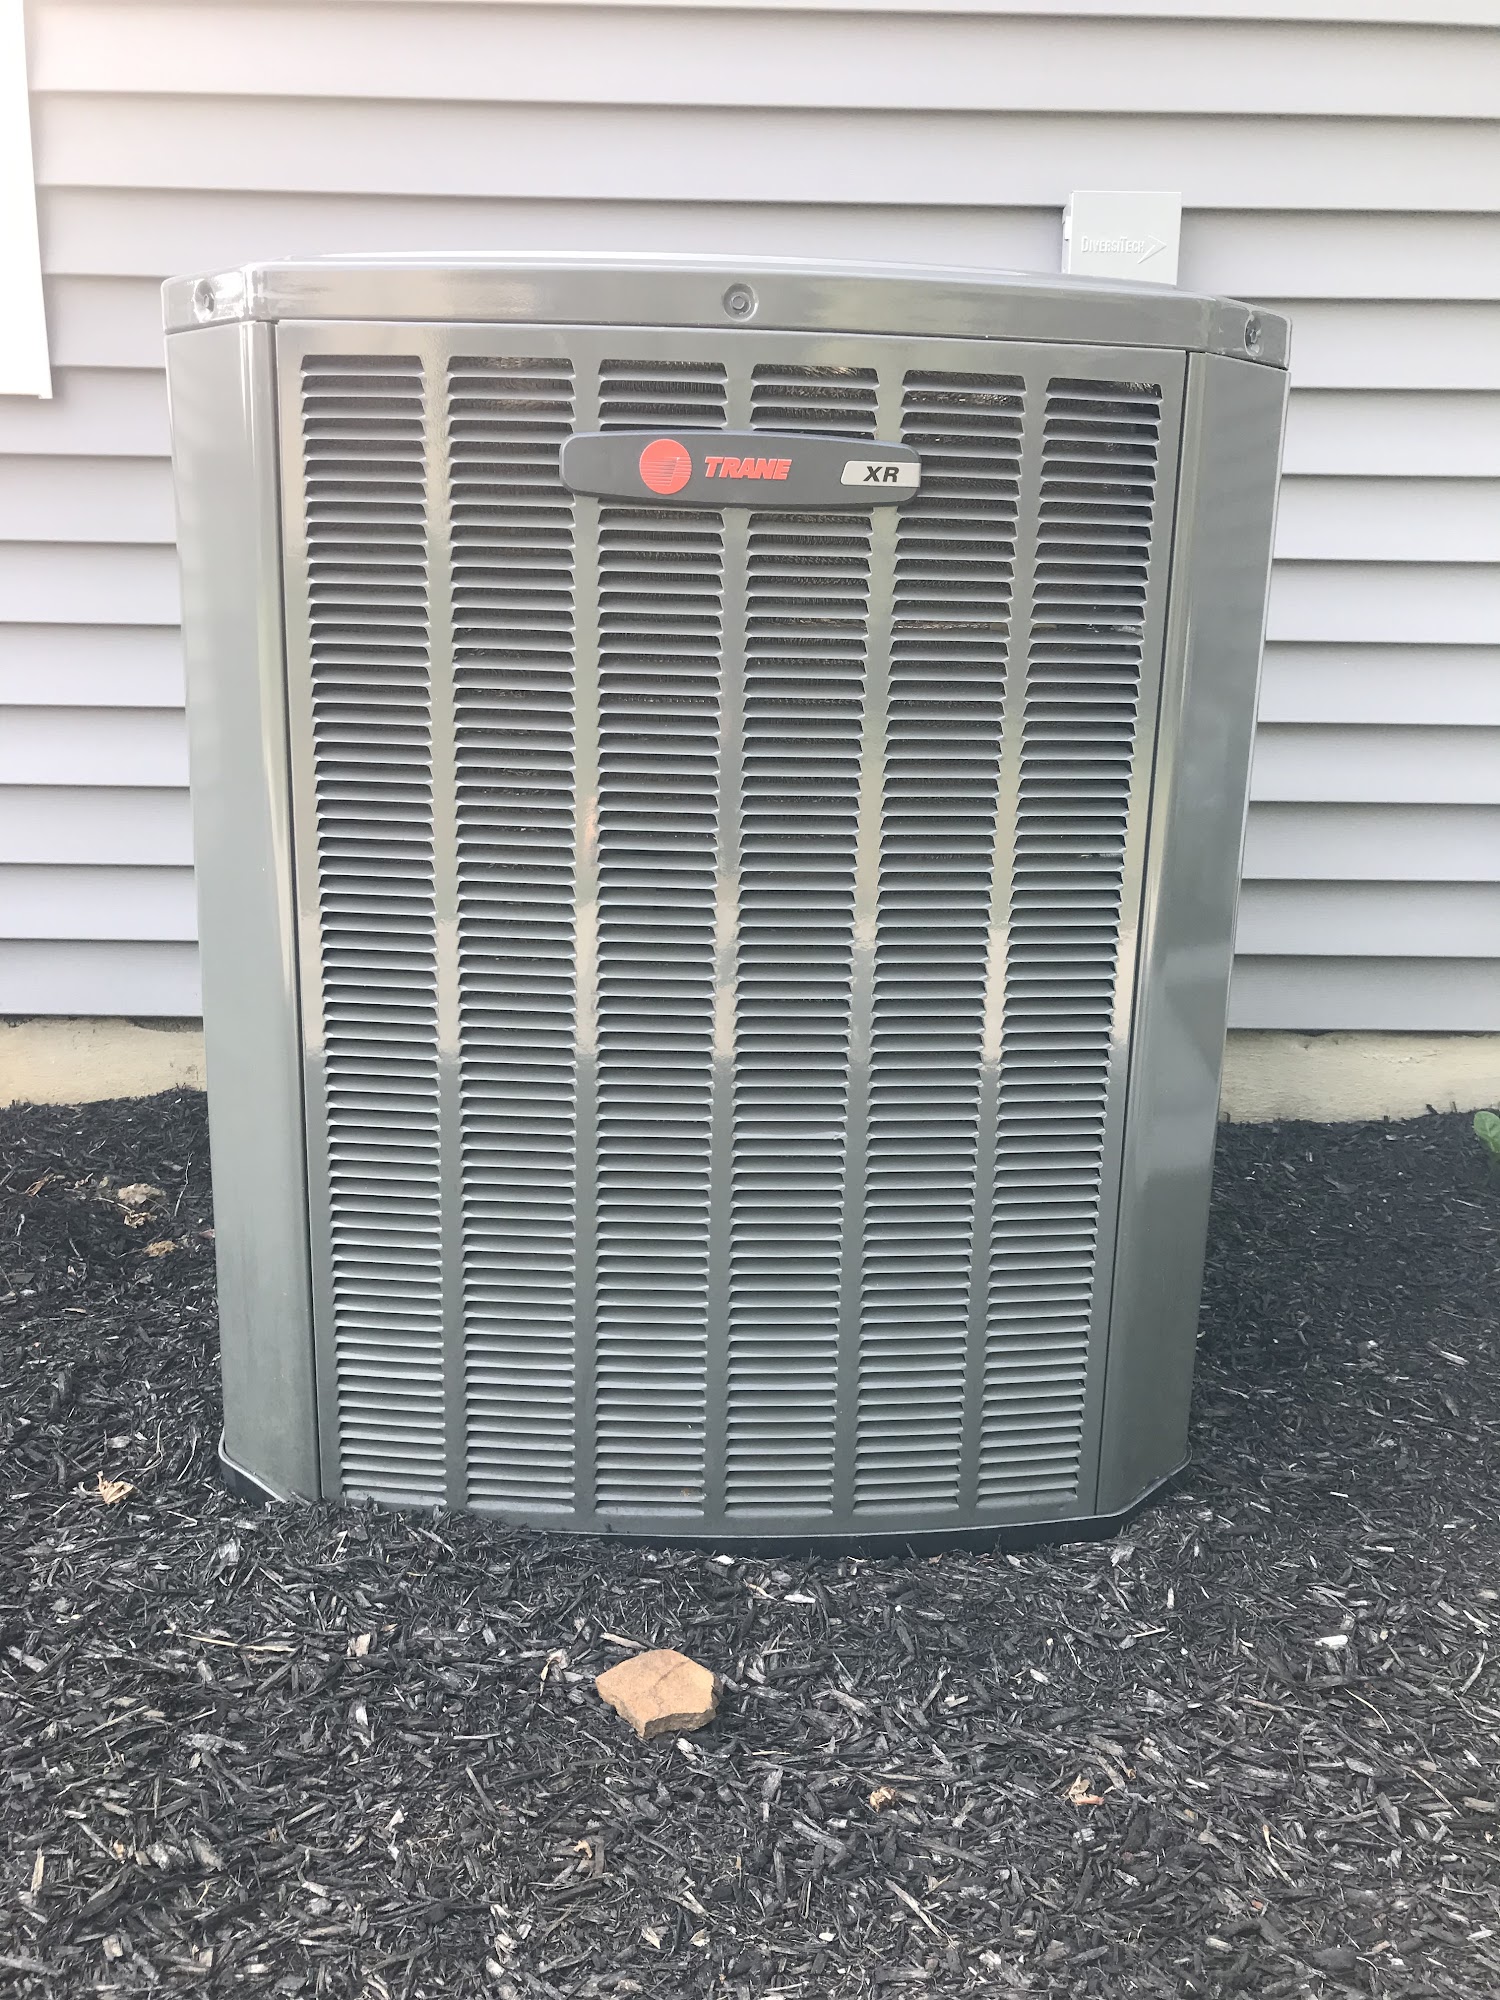 T K Heating & Air Conditioning (NJ)